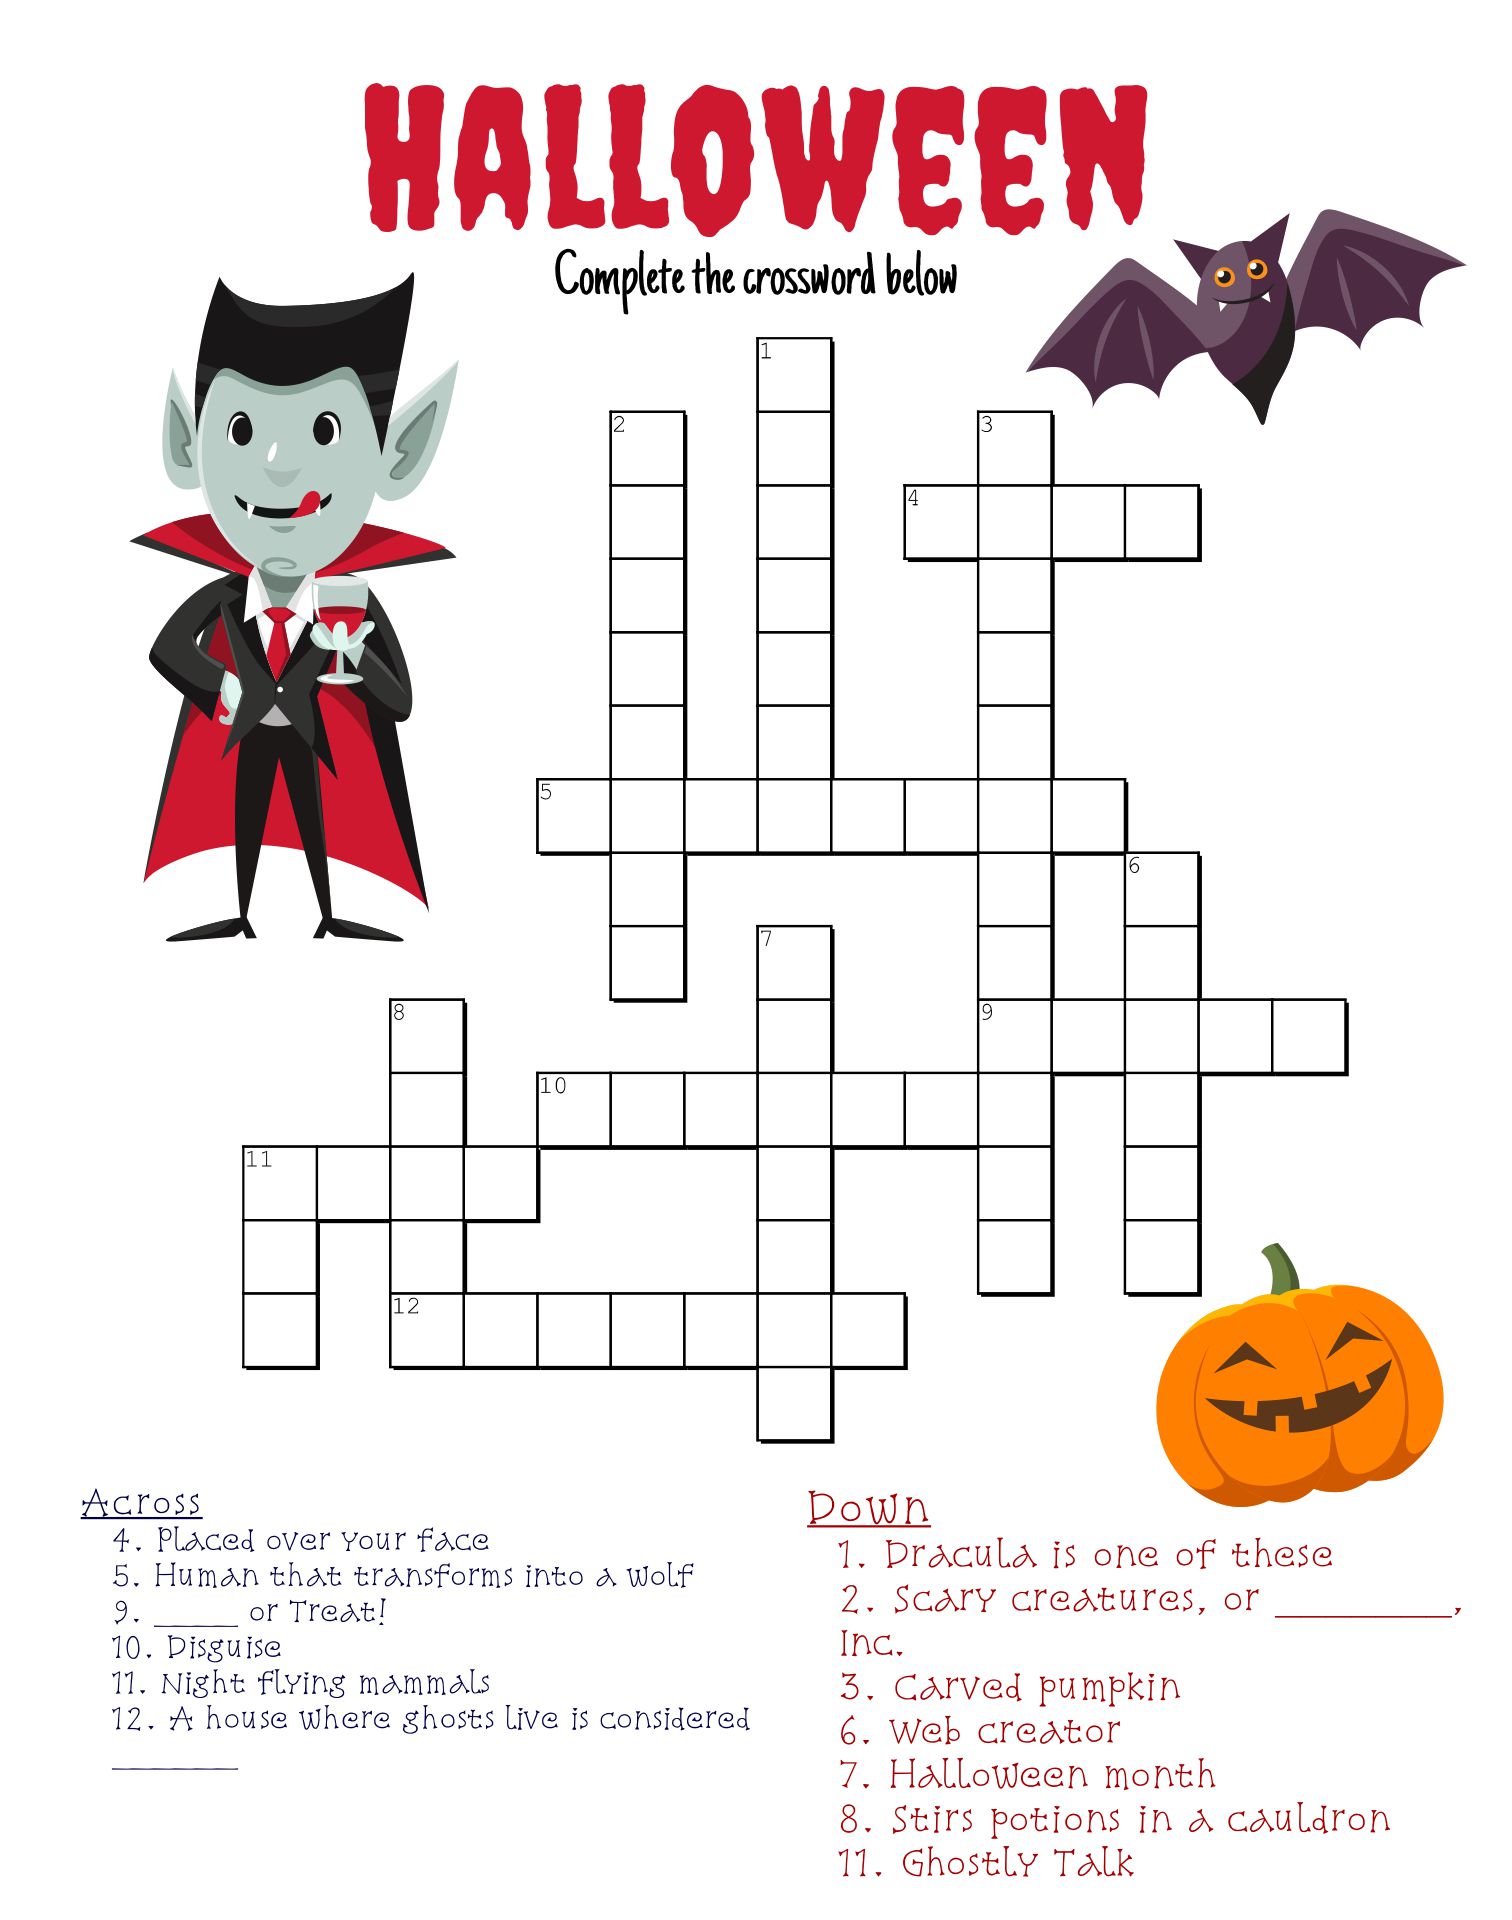 Halloween Printable Crossword Puzzles Here Are A Few Cute And Fun Printables To Add A Little 